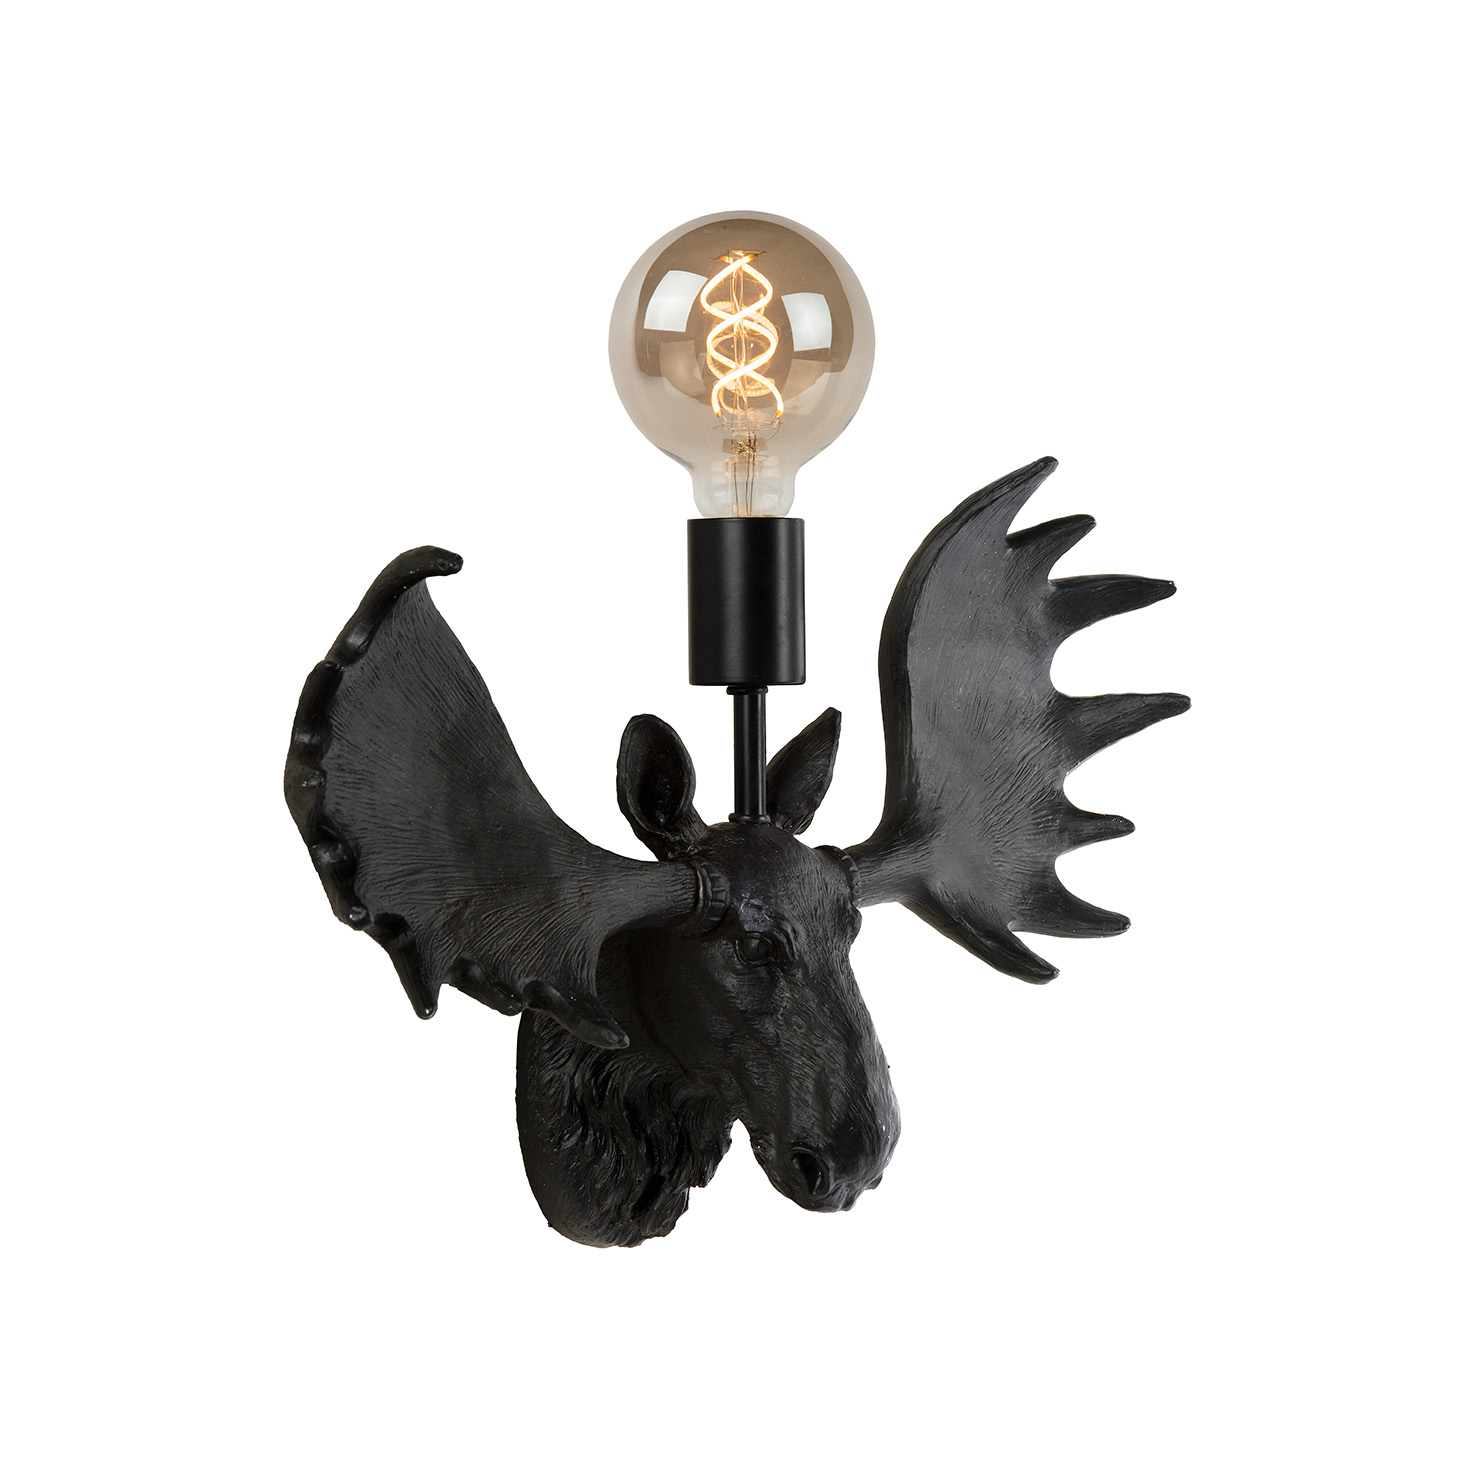 Wall light Lucide EXTRAVAGANZA MOOSE - 1xE27 - Black